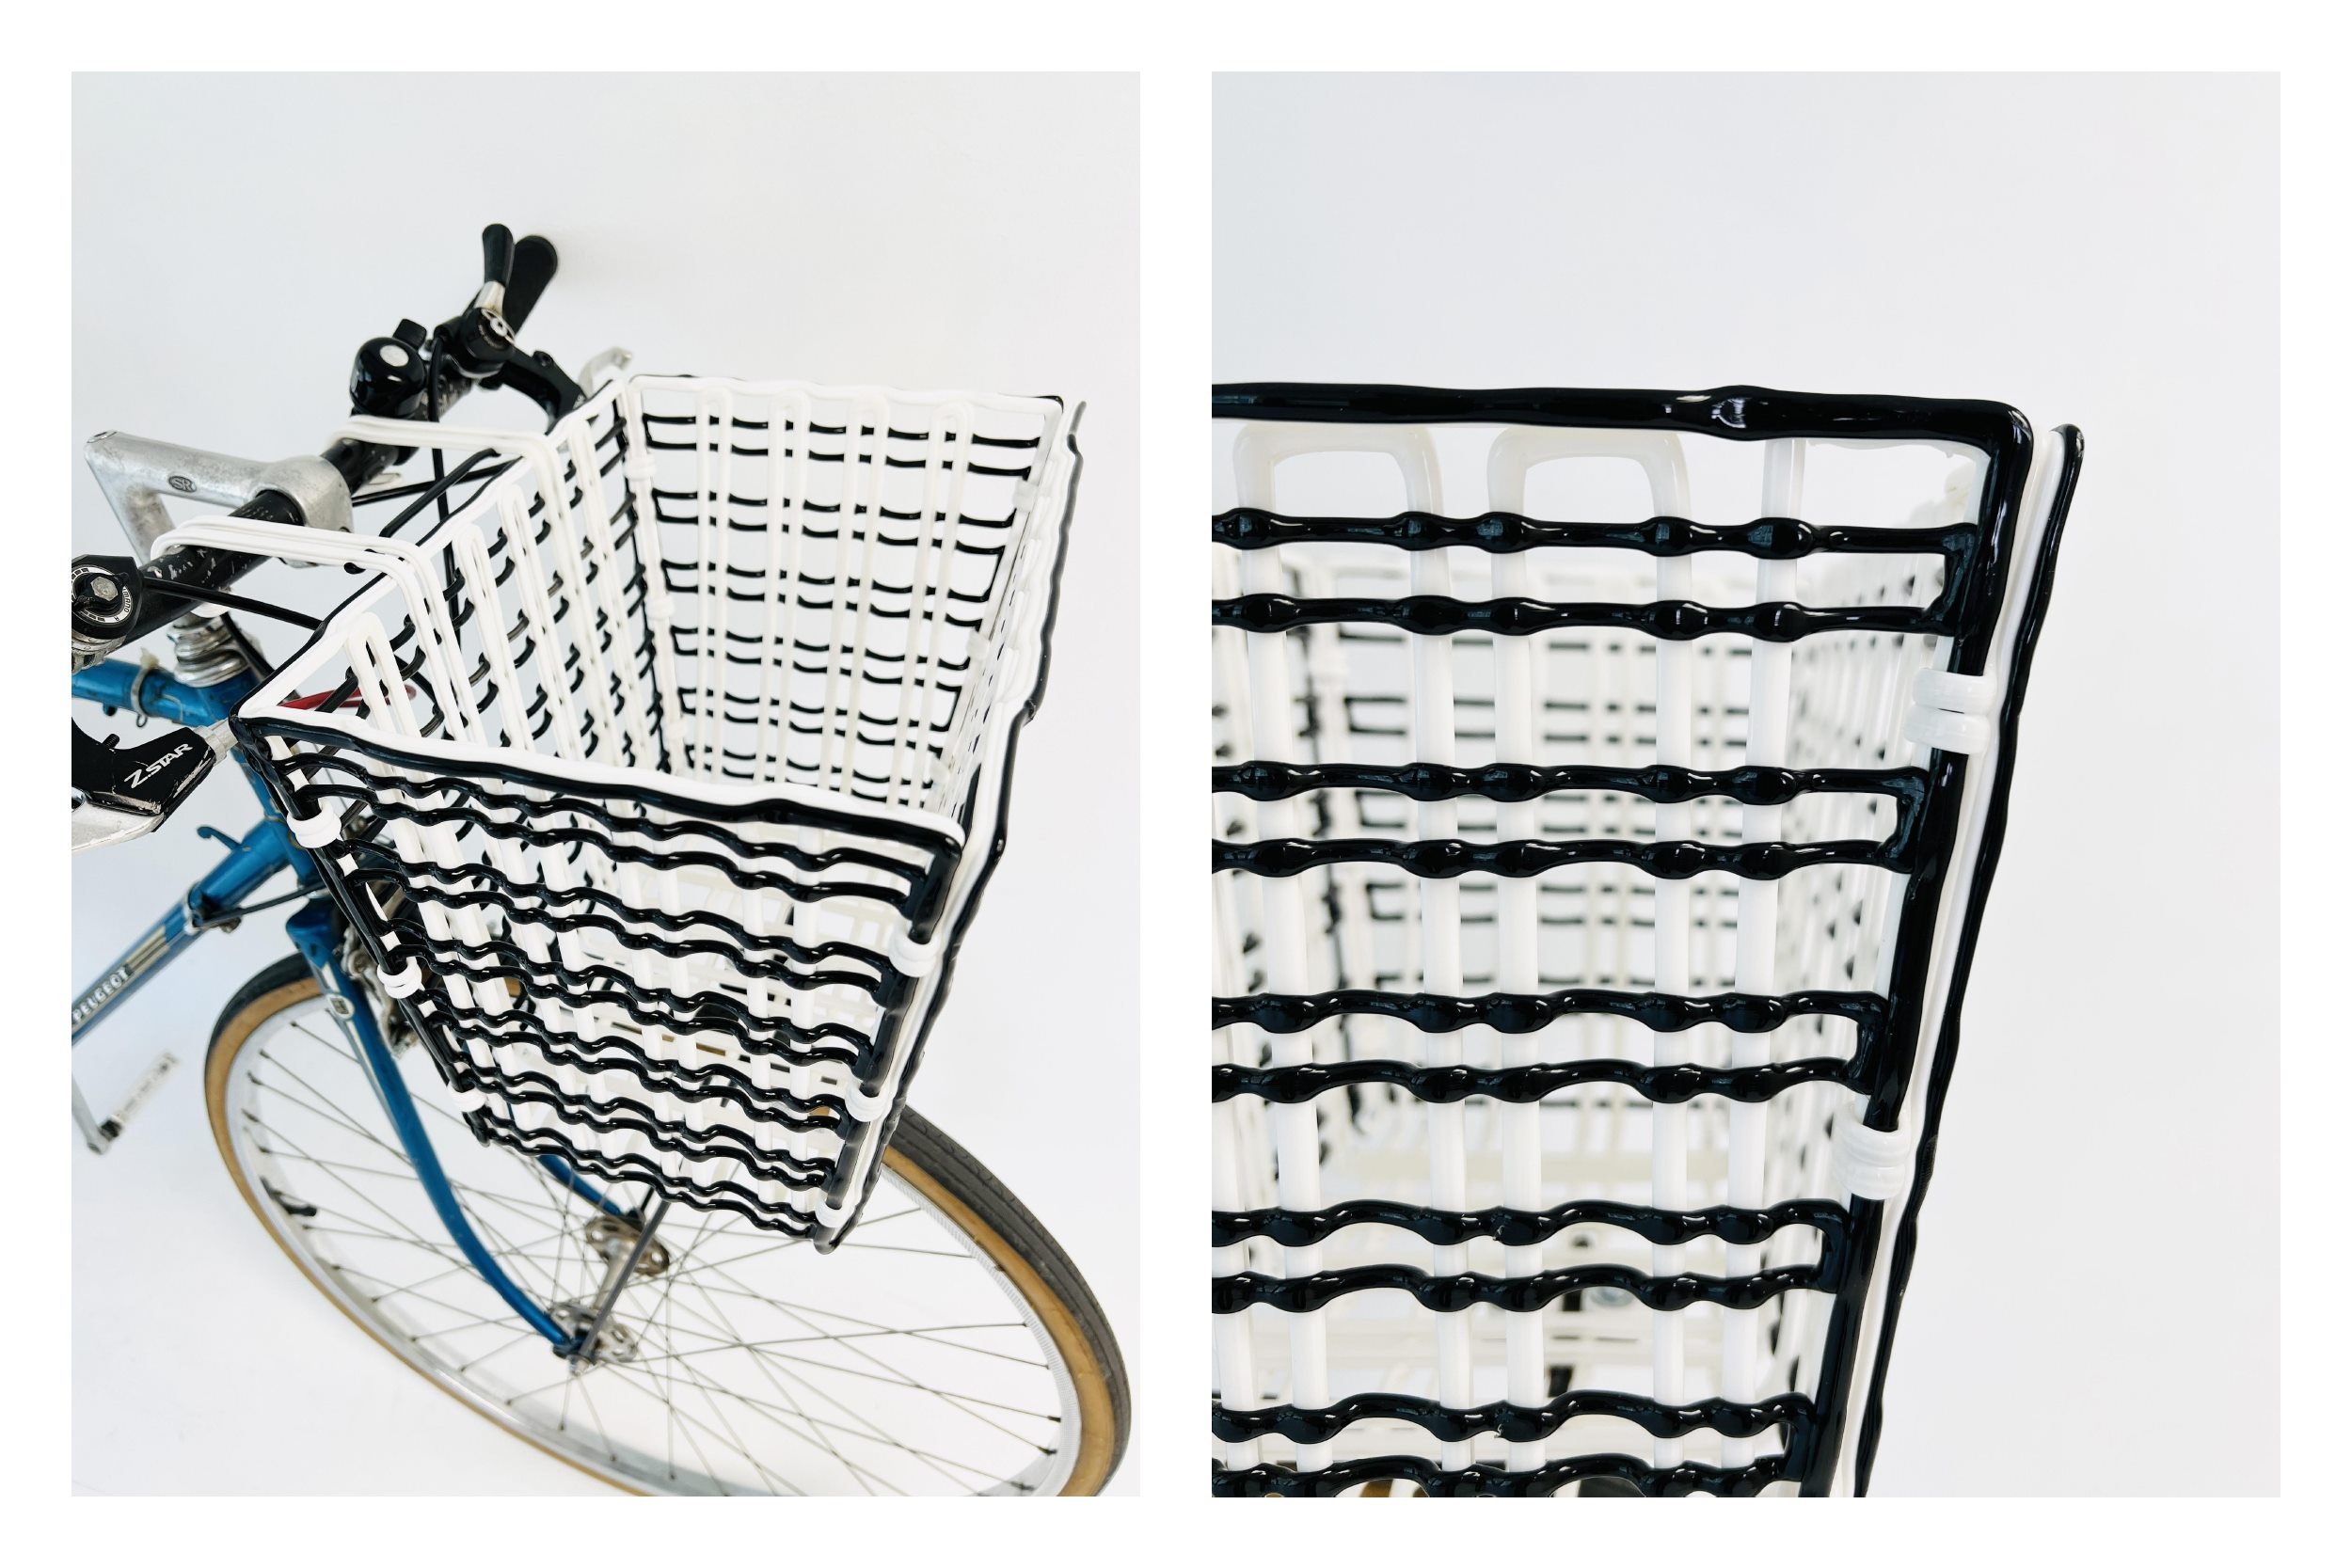 Black and white plastic lines are melted into the shape of bike handlebar basket.